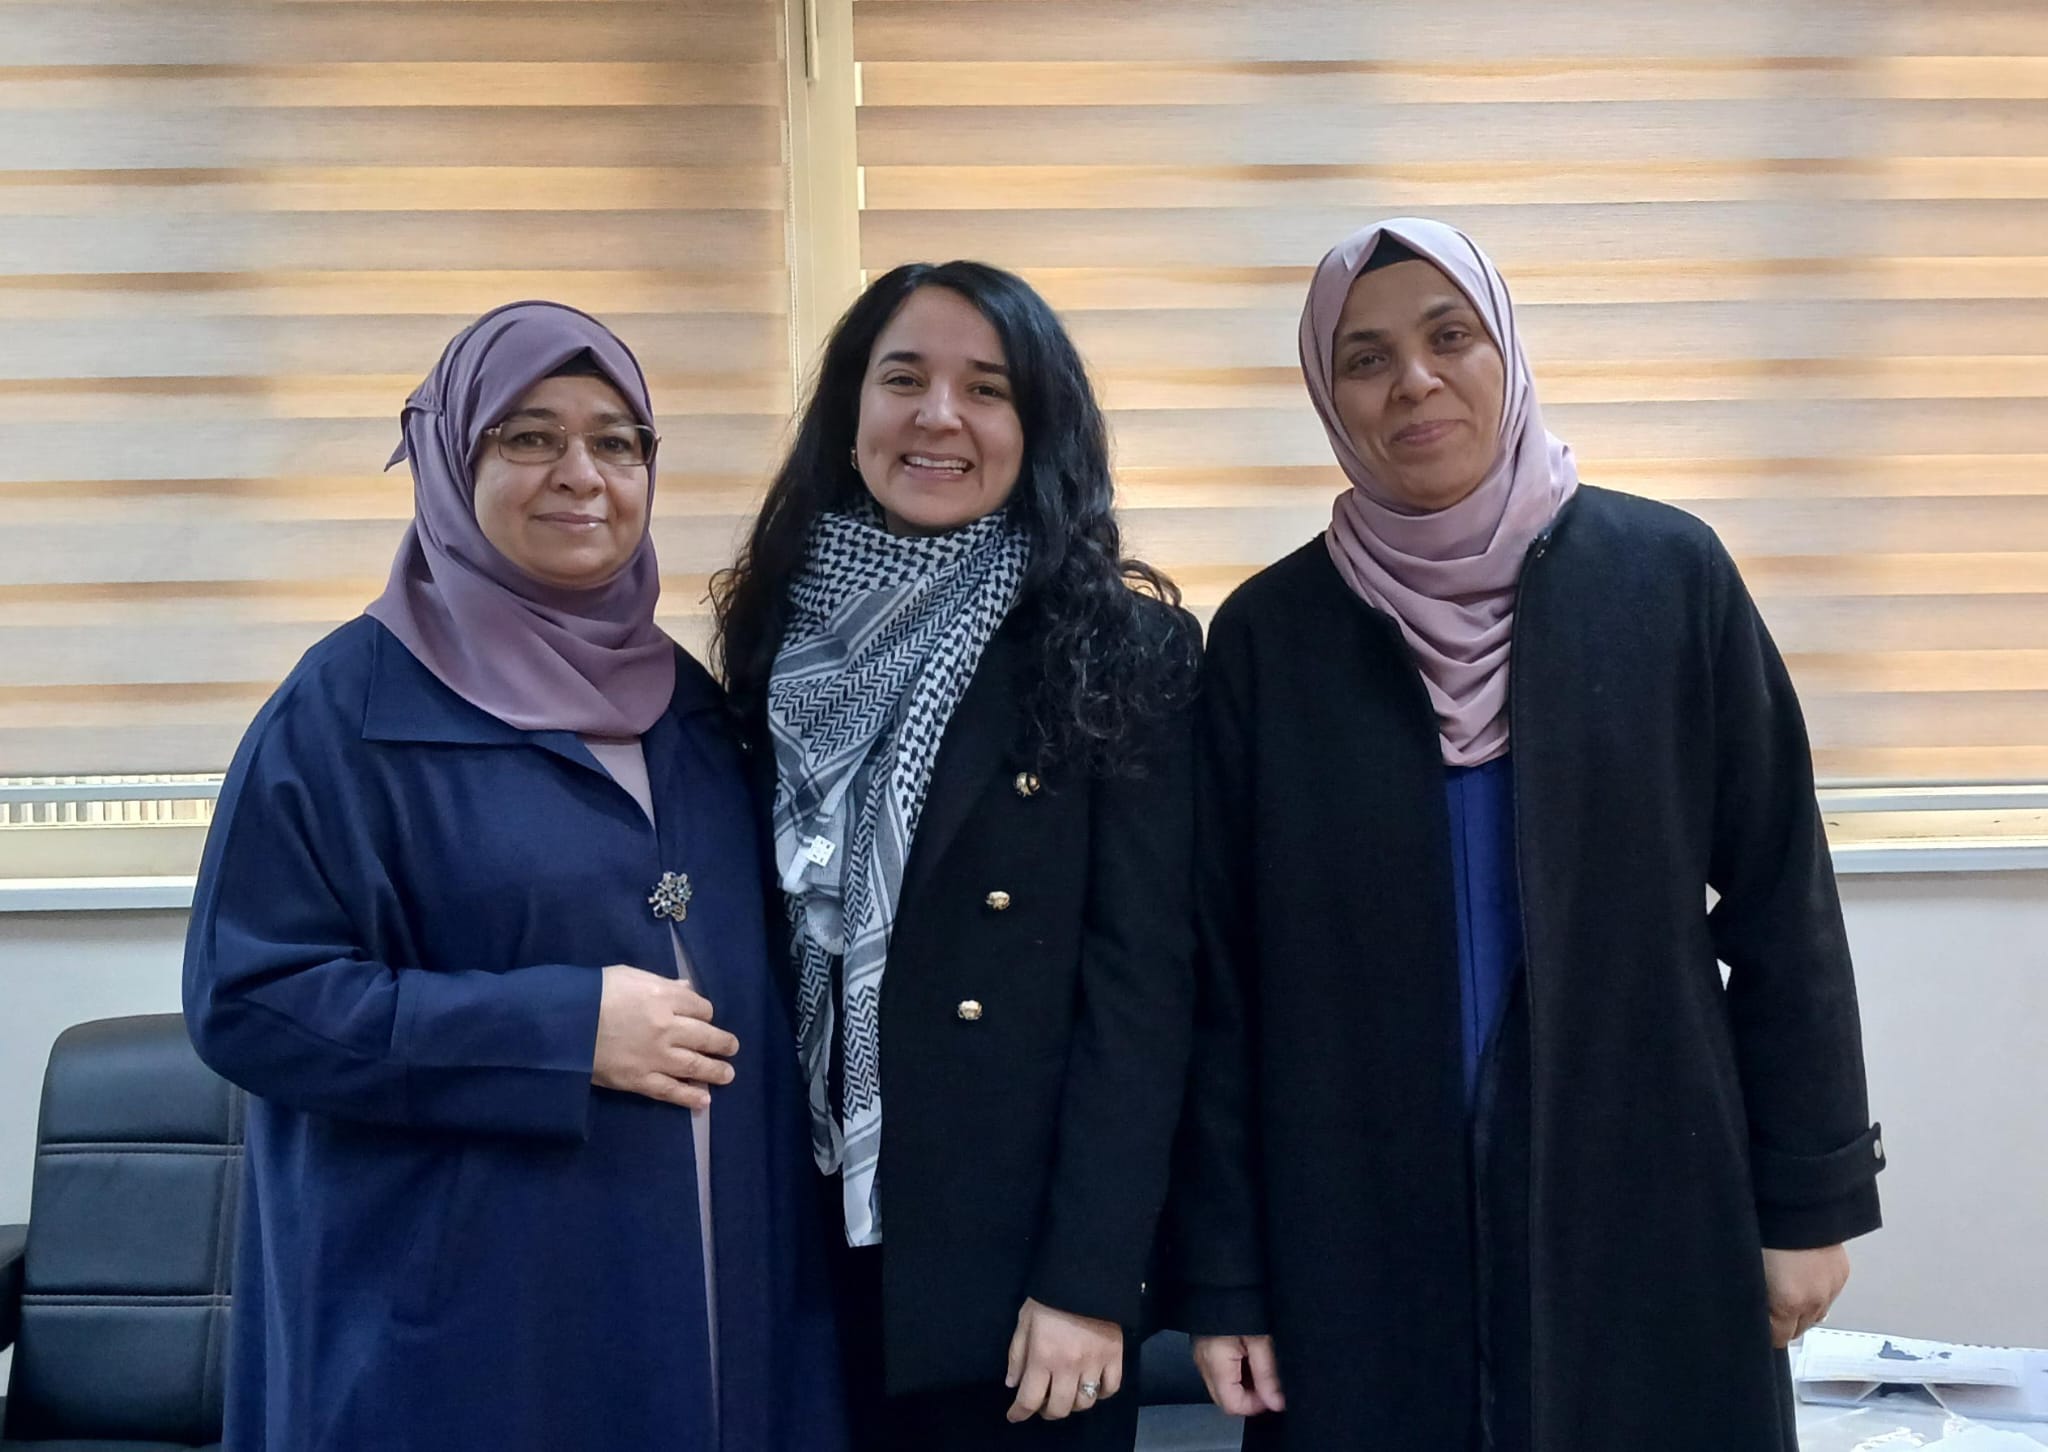 A member of the European Coalition visited the headquarters of the Women’s Global Coalition for Quds and Palestine in Istanbul